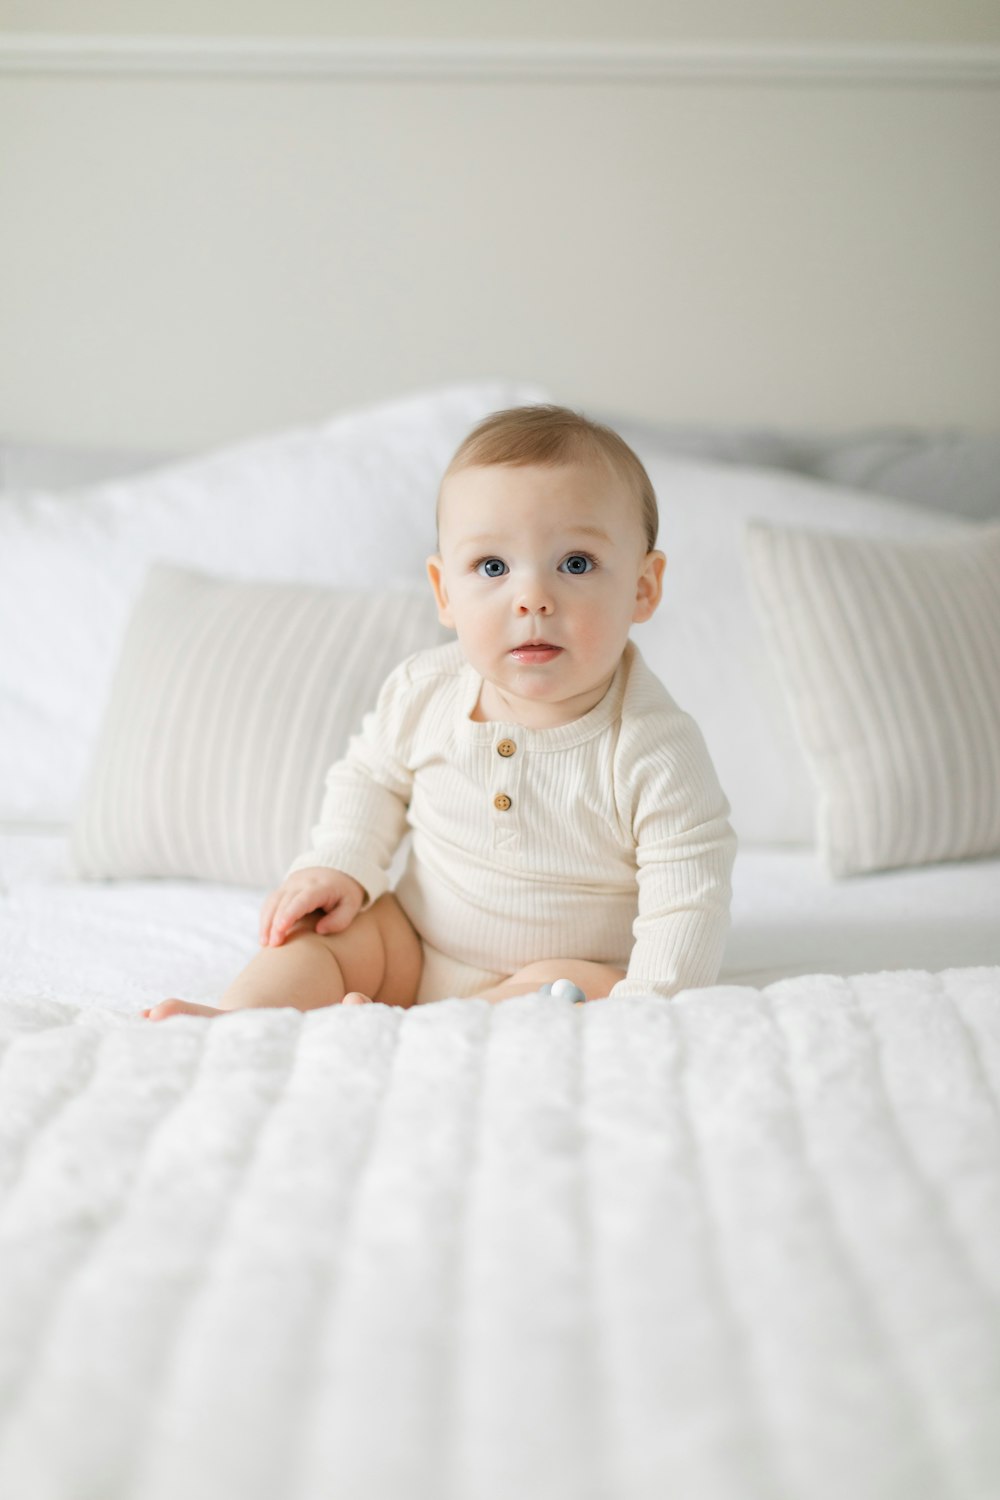 a baby sitting on a bed with white sheets